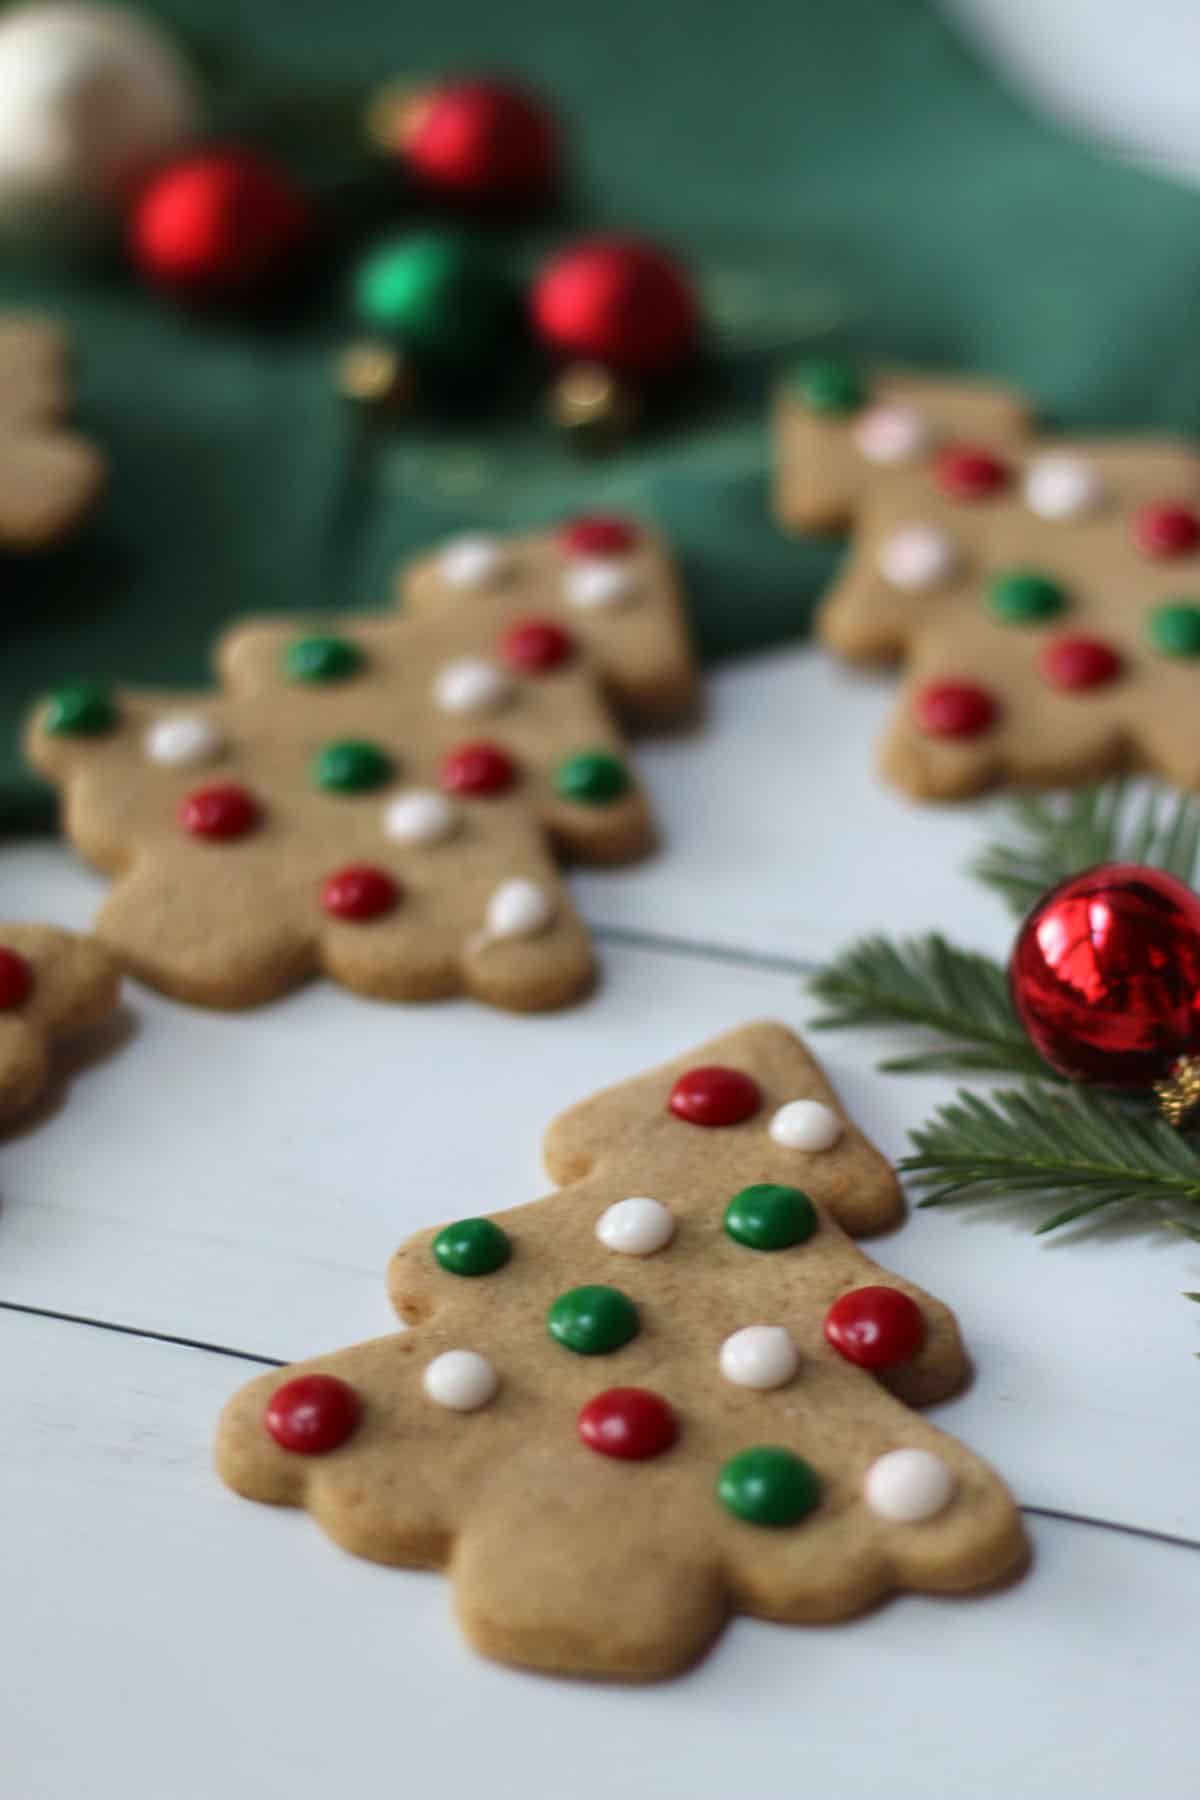 Christree cutout cookies with red, white and green icing dots.